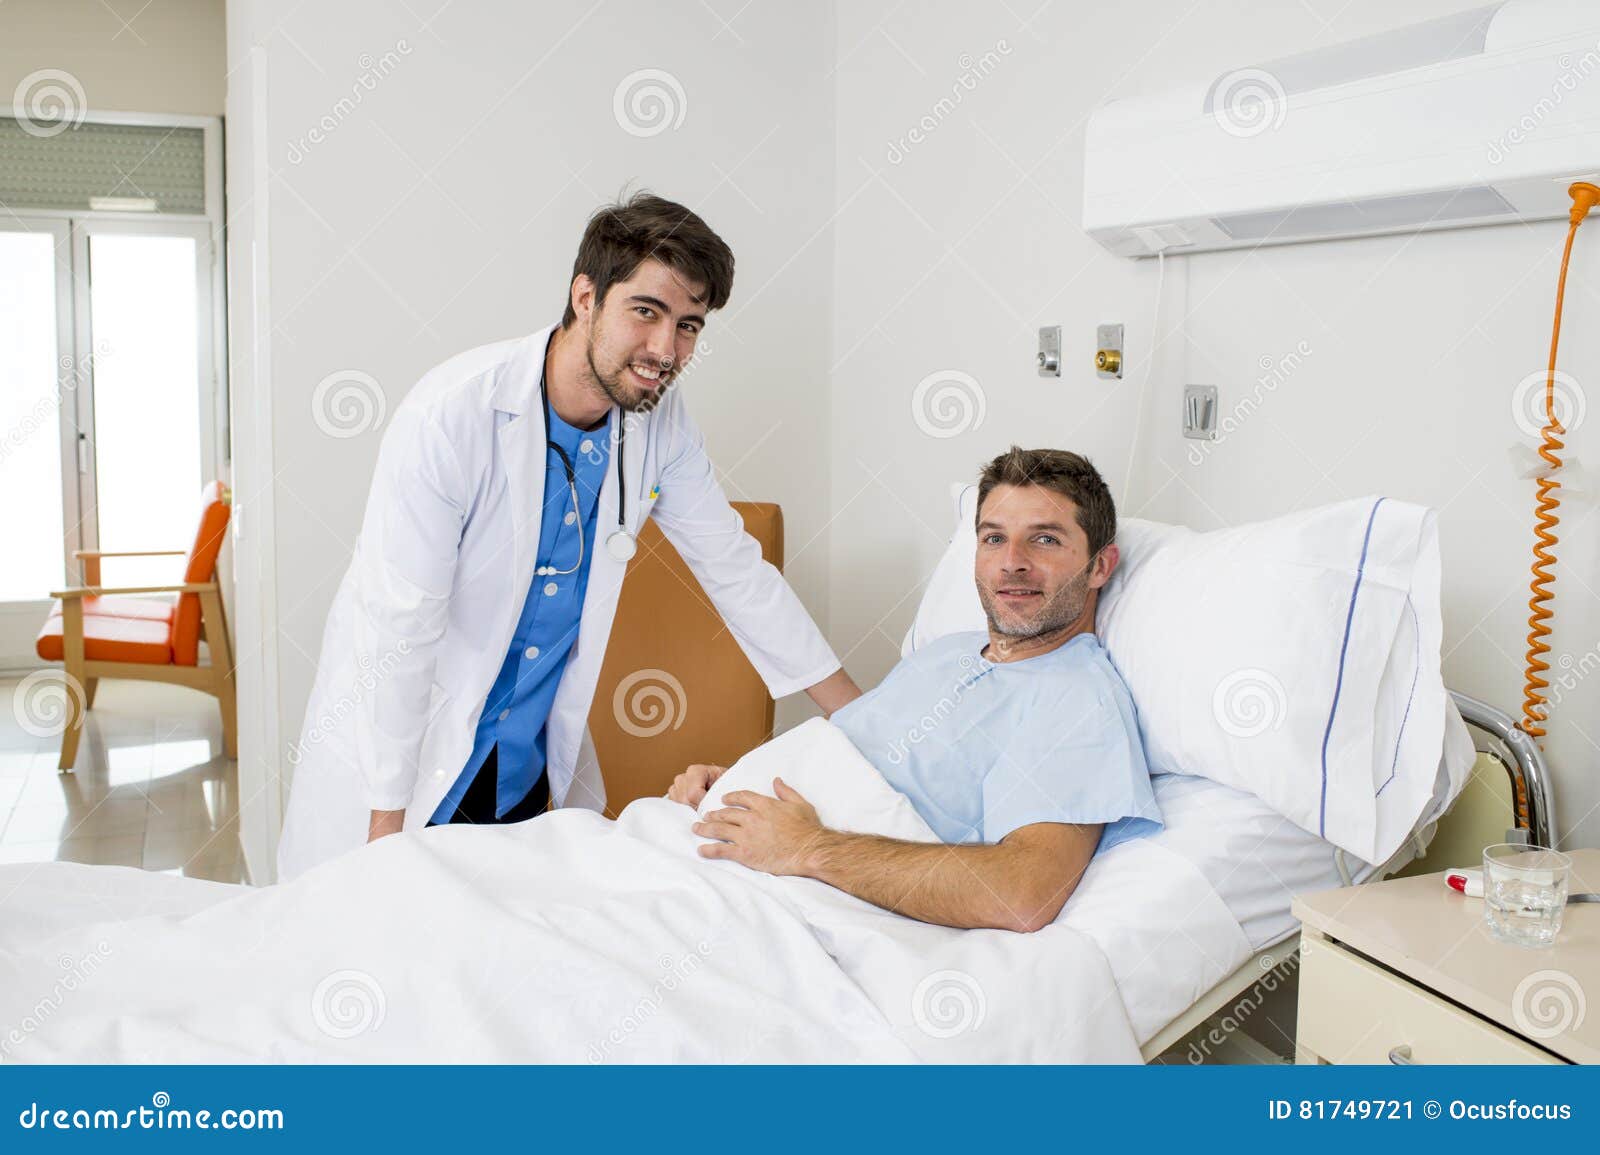 doctor consulting patient lying on hospital bed talking about the diagnose and treatment in modern clinic